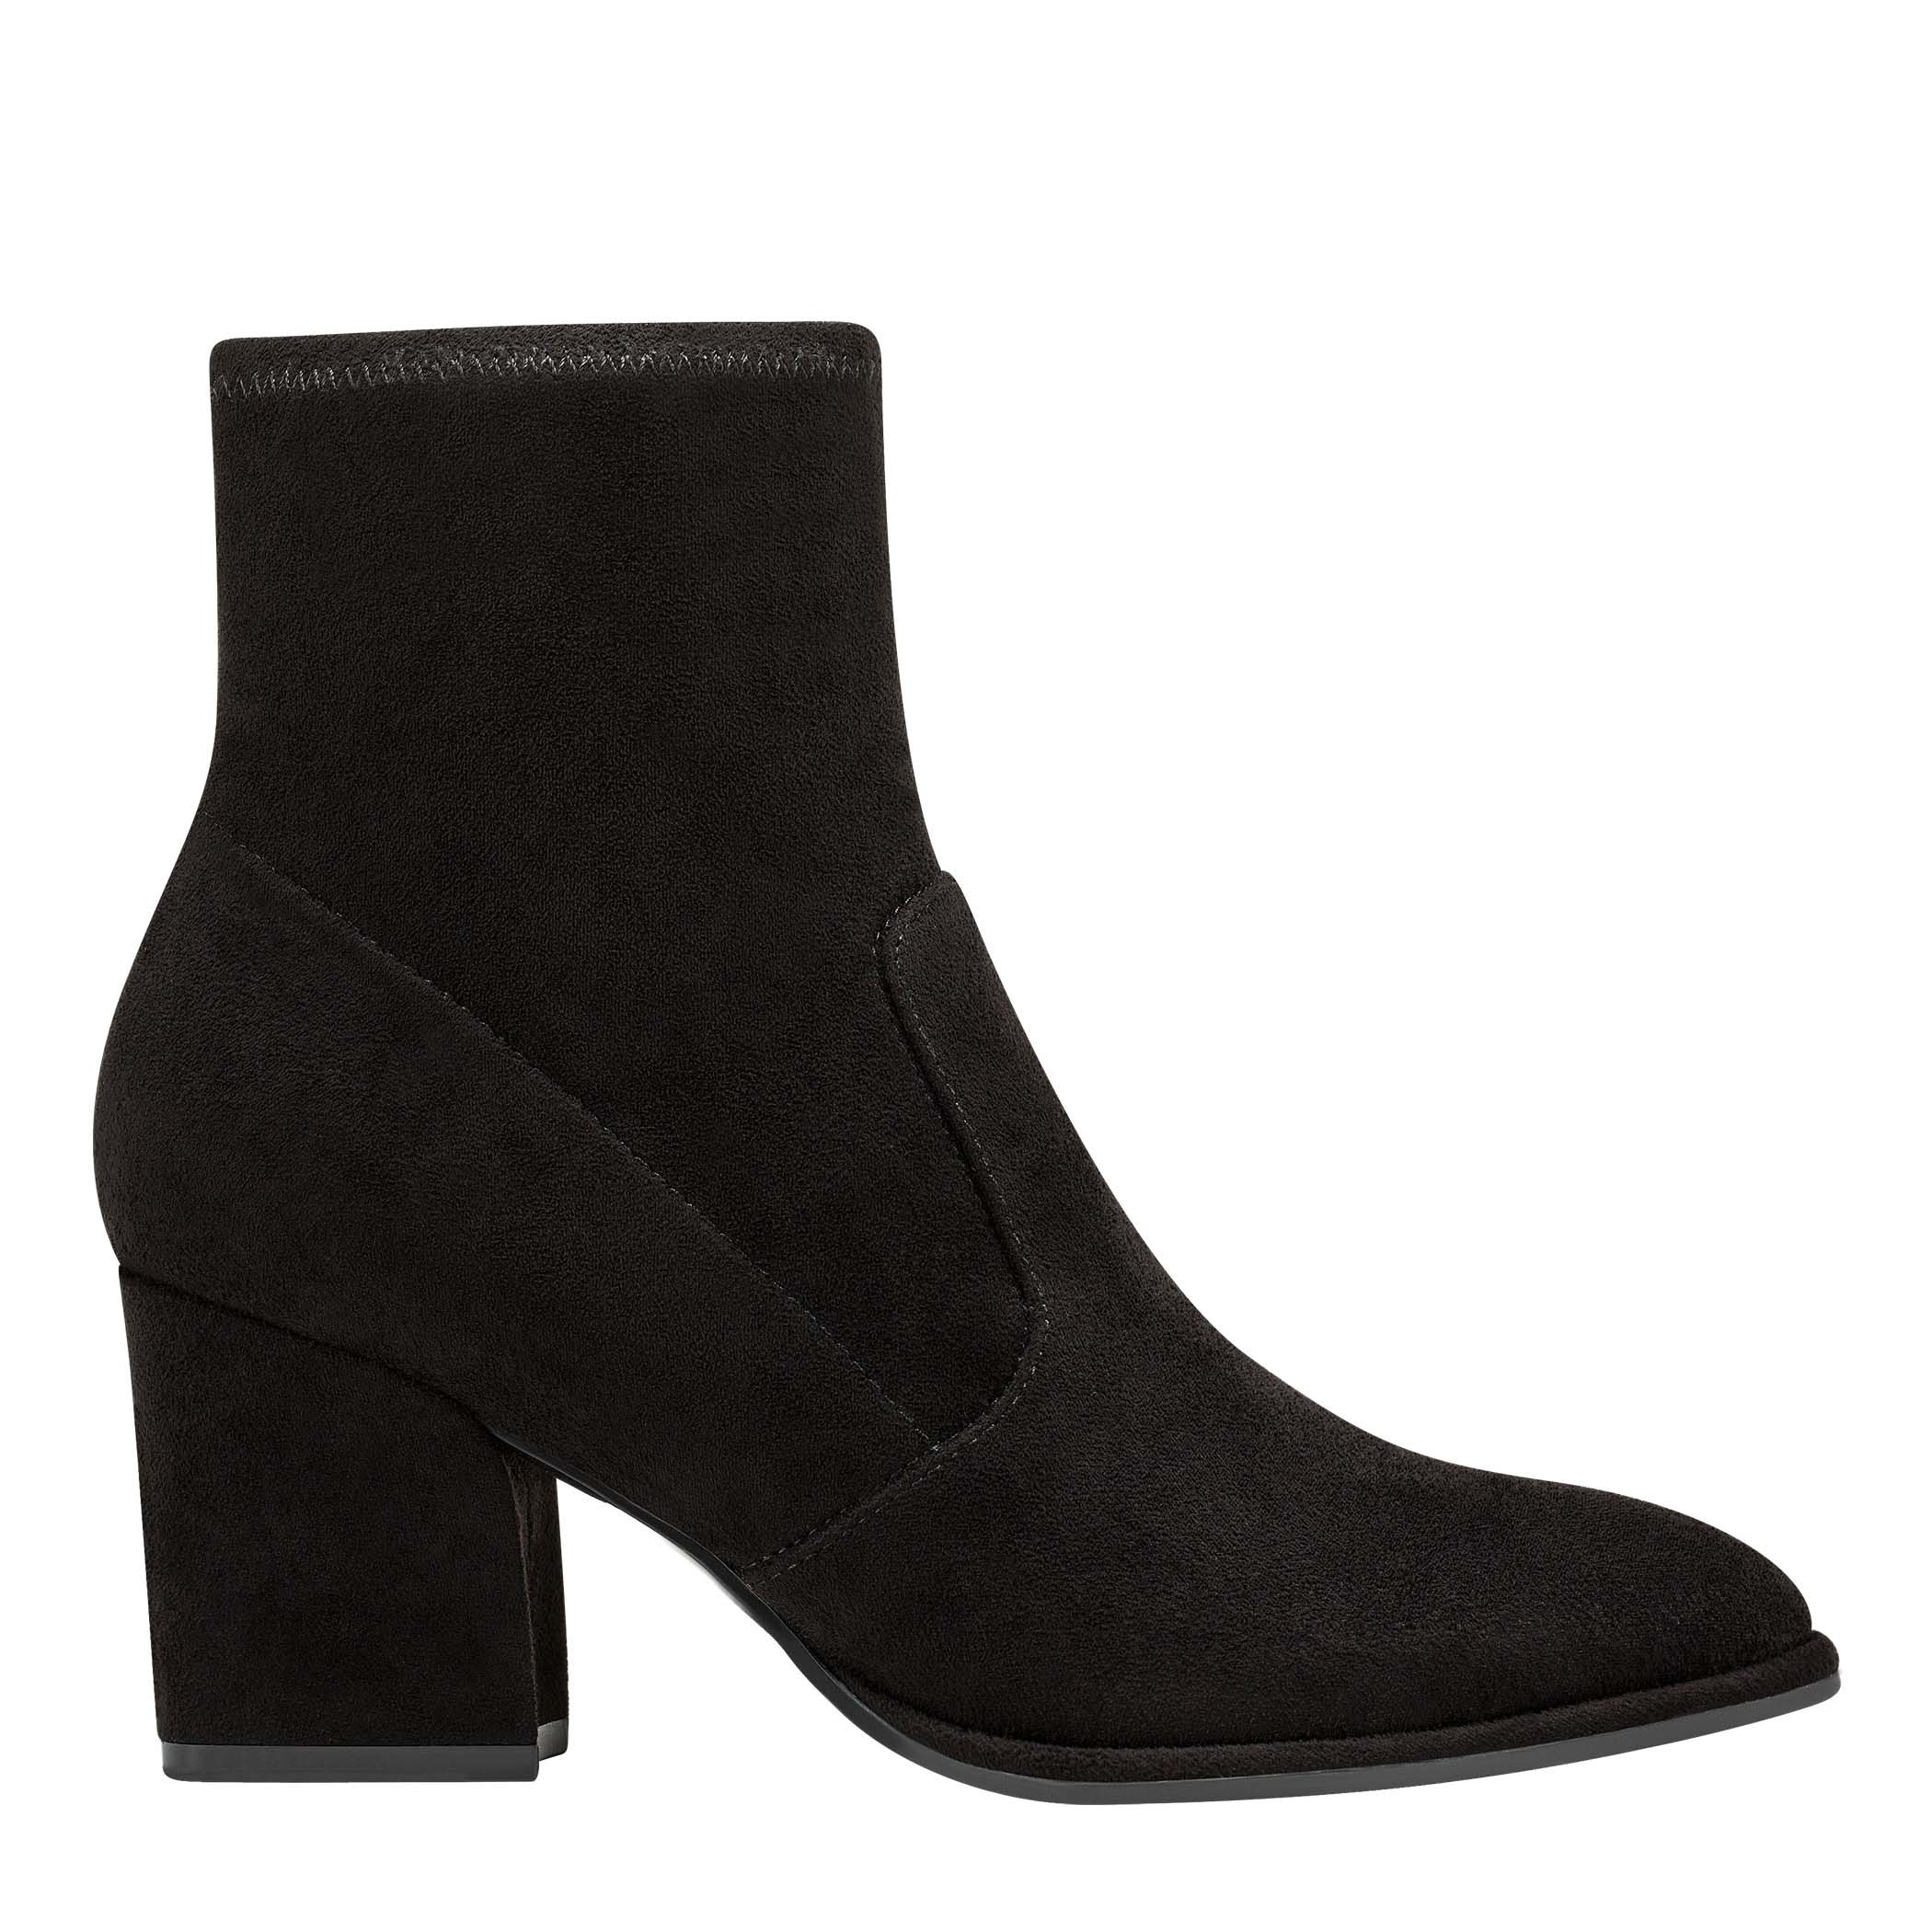 Leave Heeled Bootie